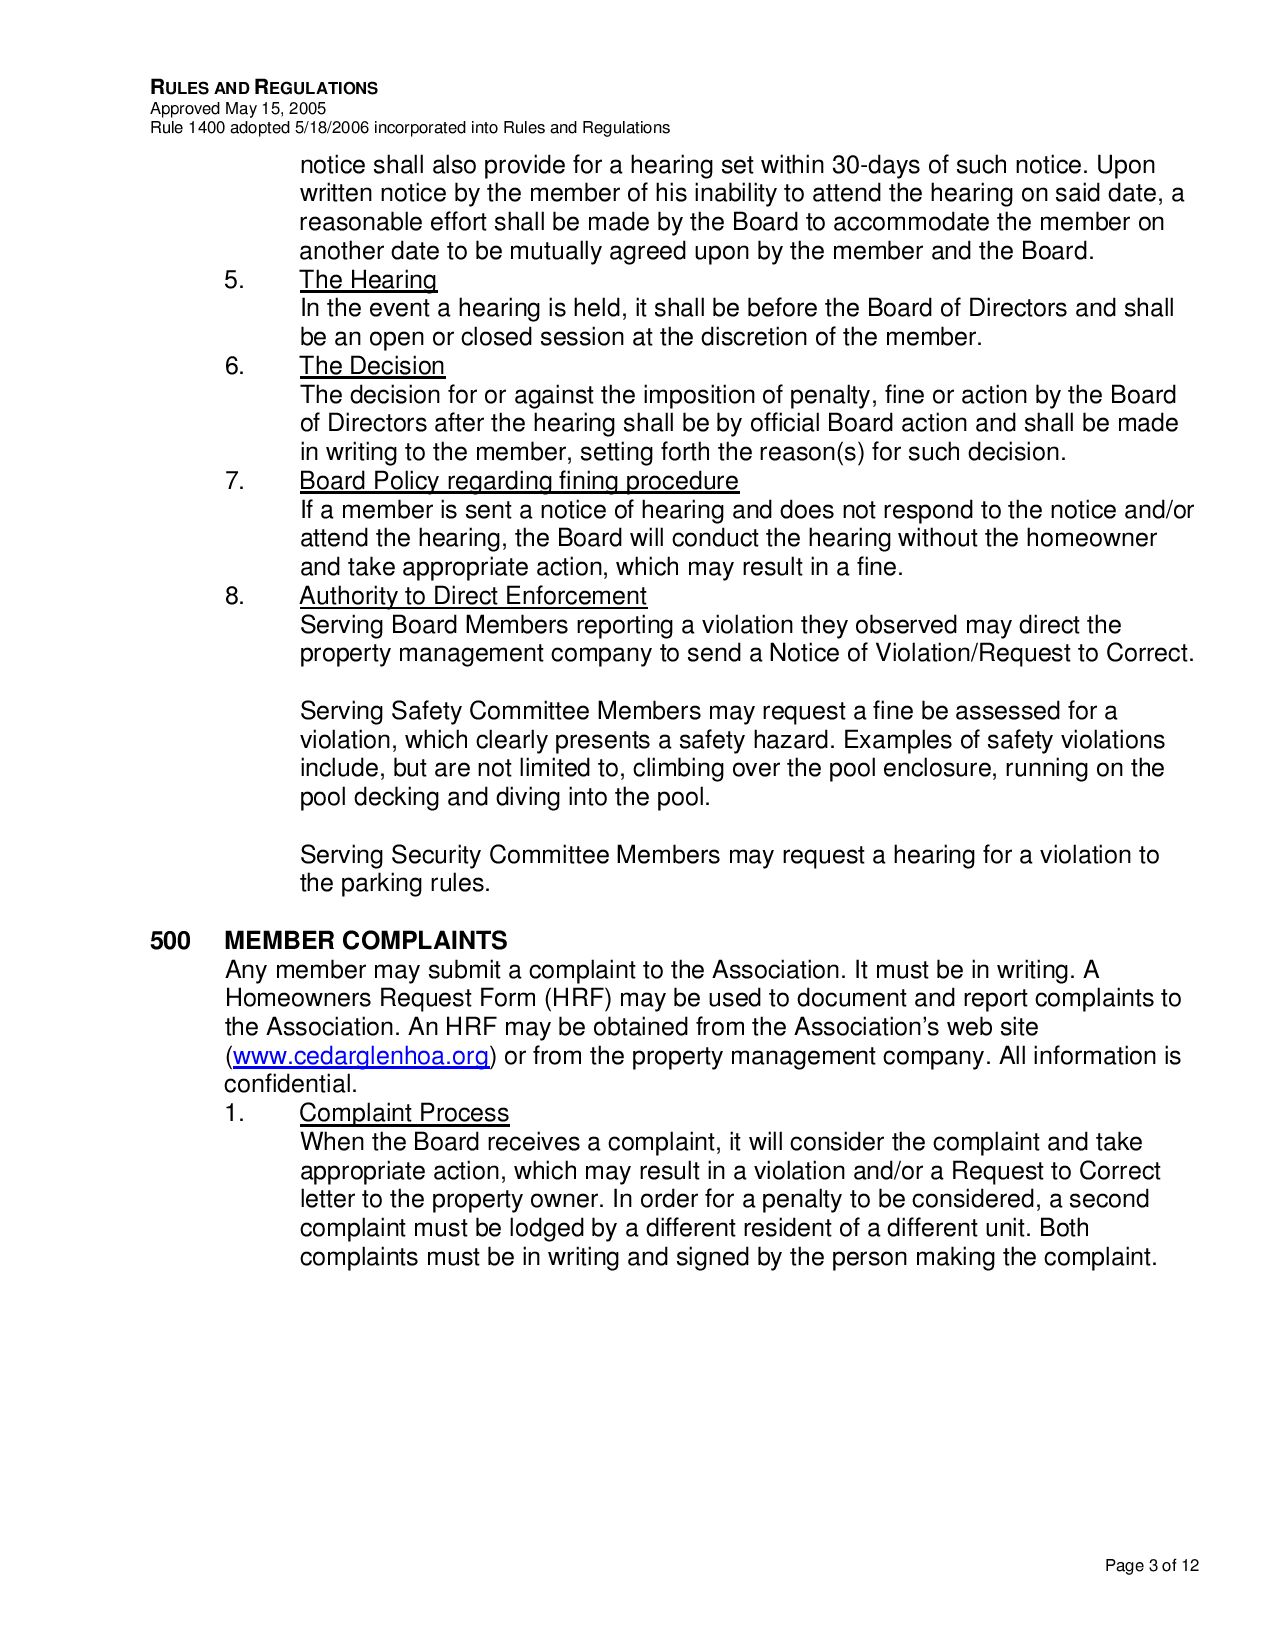 Page 3 of the HOA Rules and Regulations